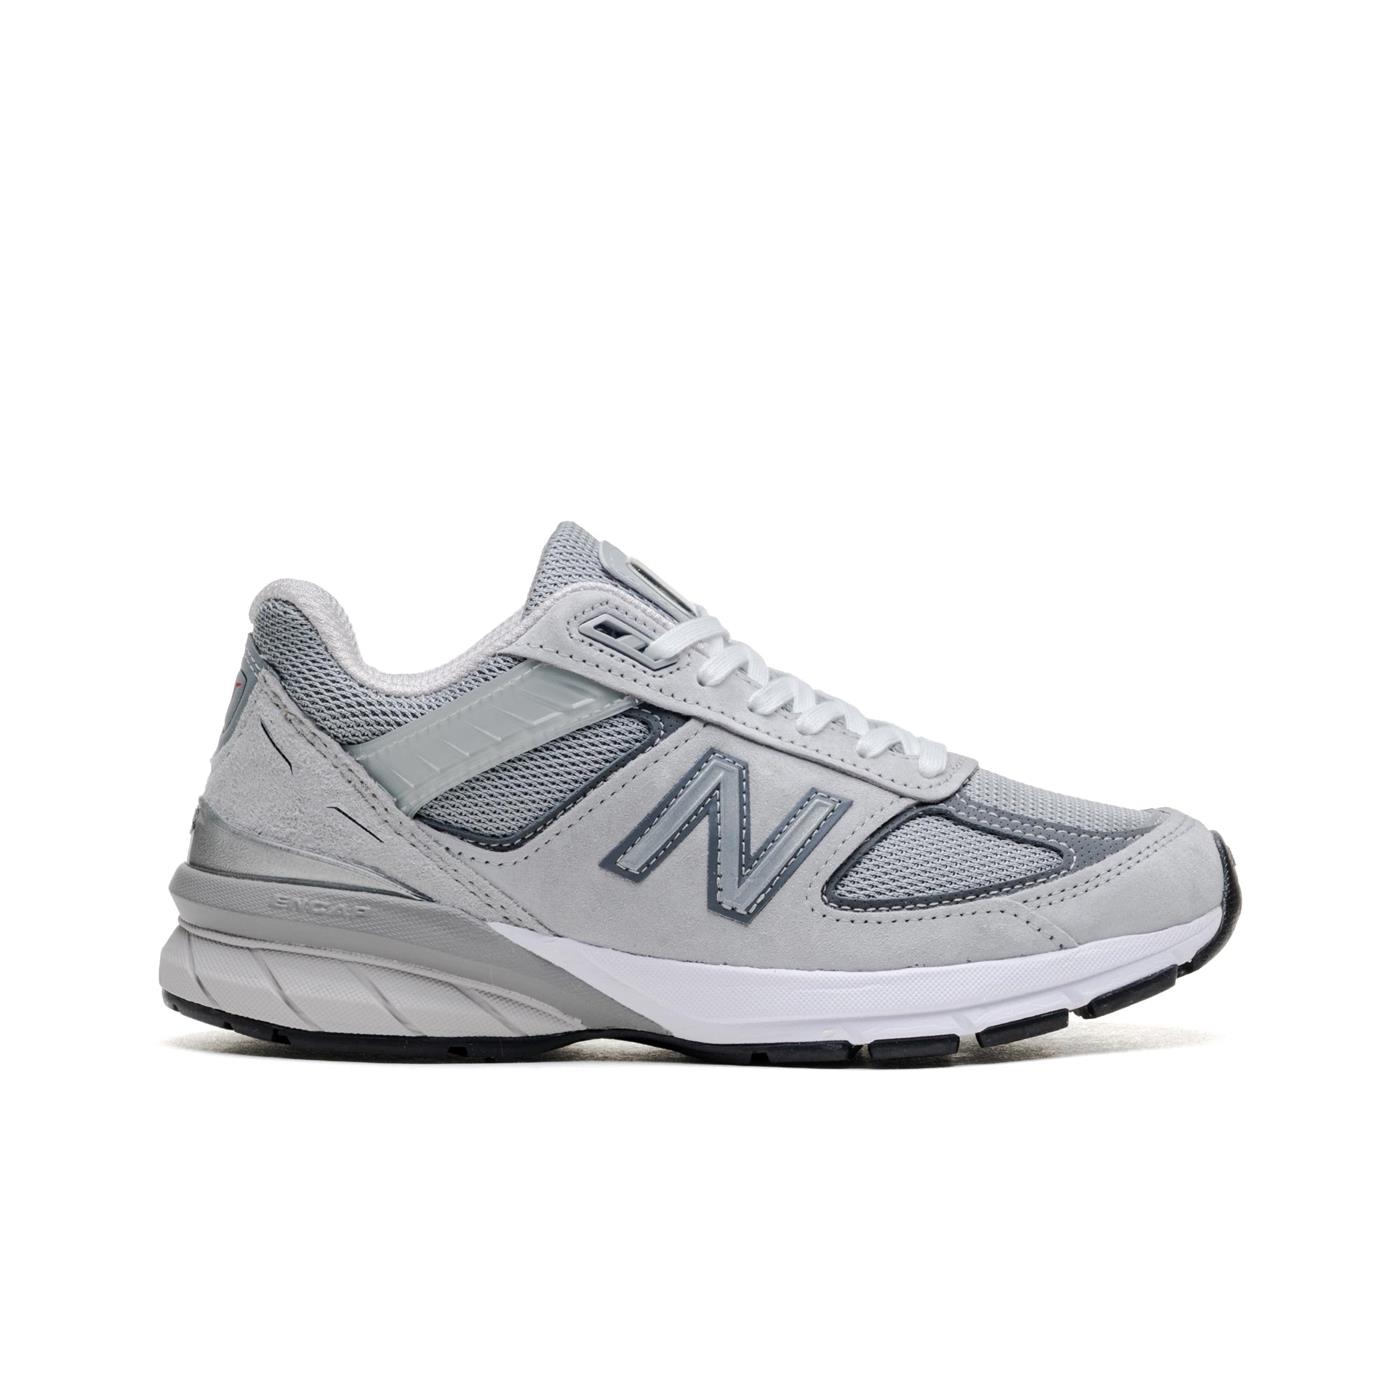 W990GL5 Sneakers NEW BALANCE 990v5 Made in USA Grey for Woman RvceShops  Images of another Dime x New Balance 860v2 has been revealed